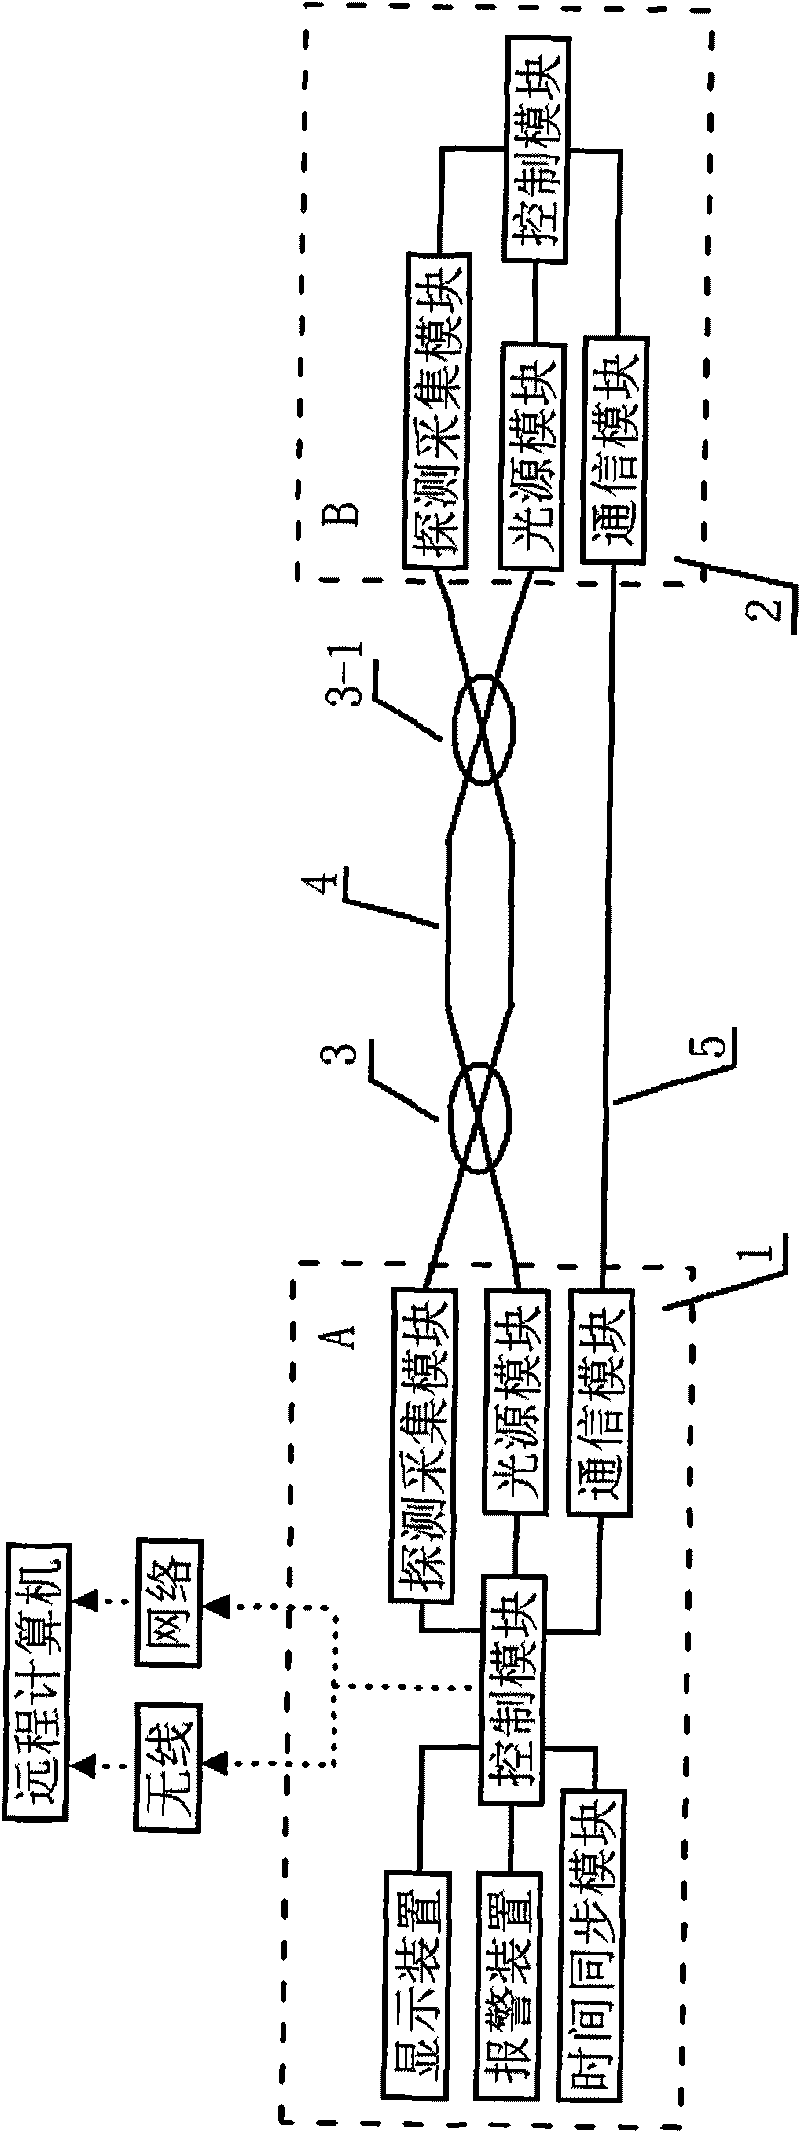 Optical fiber vibration sensing system and using method thereof based on double Mach-Zehnder interferometers